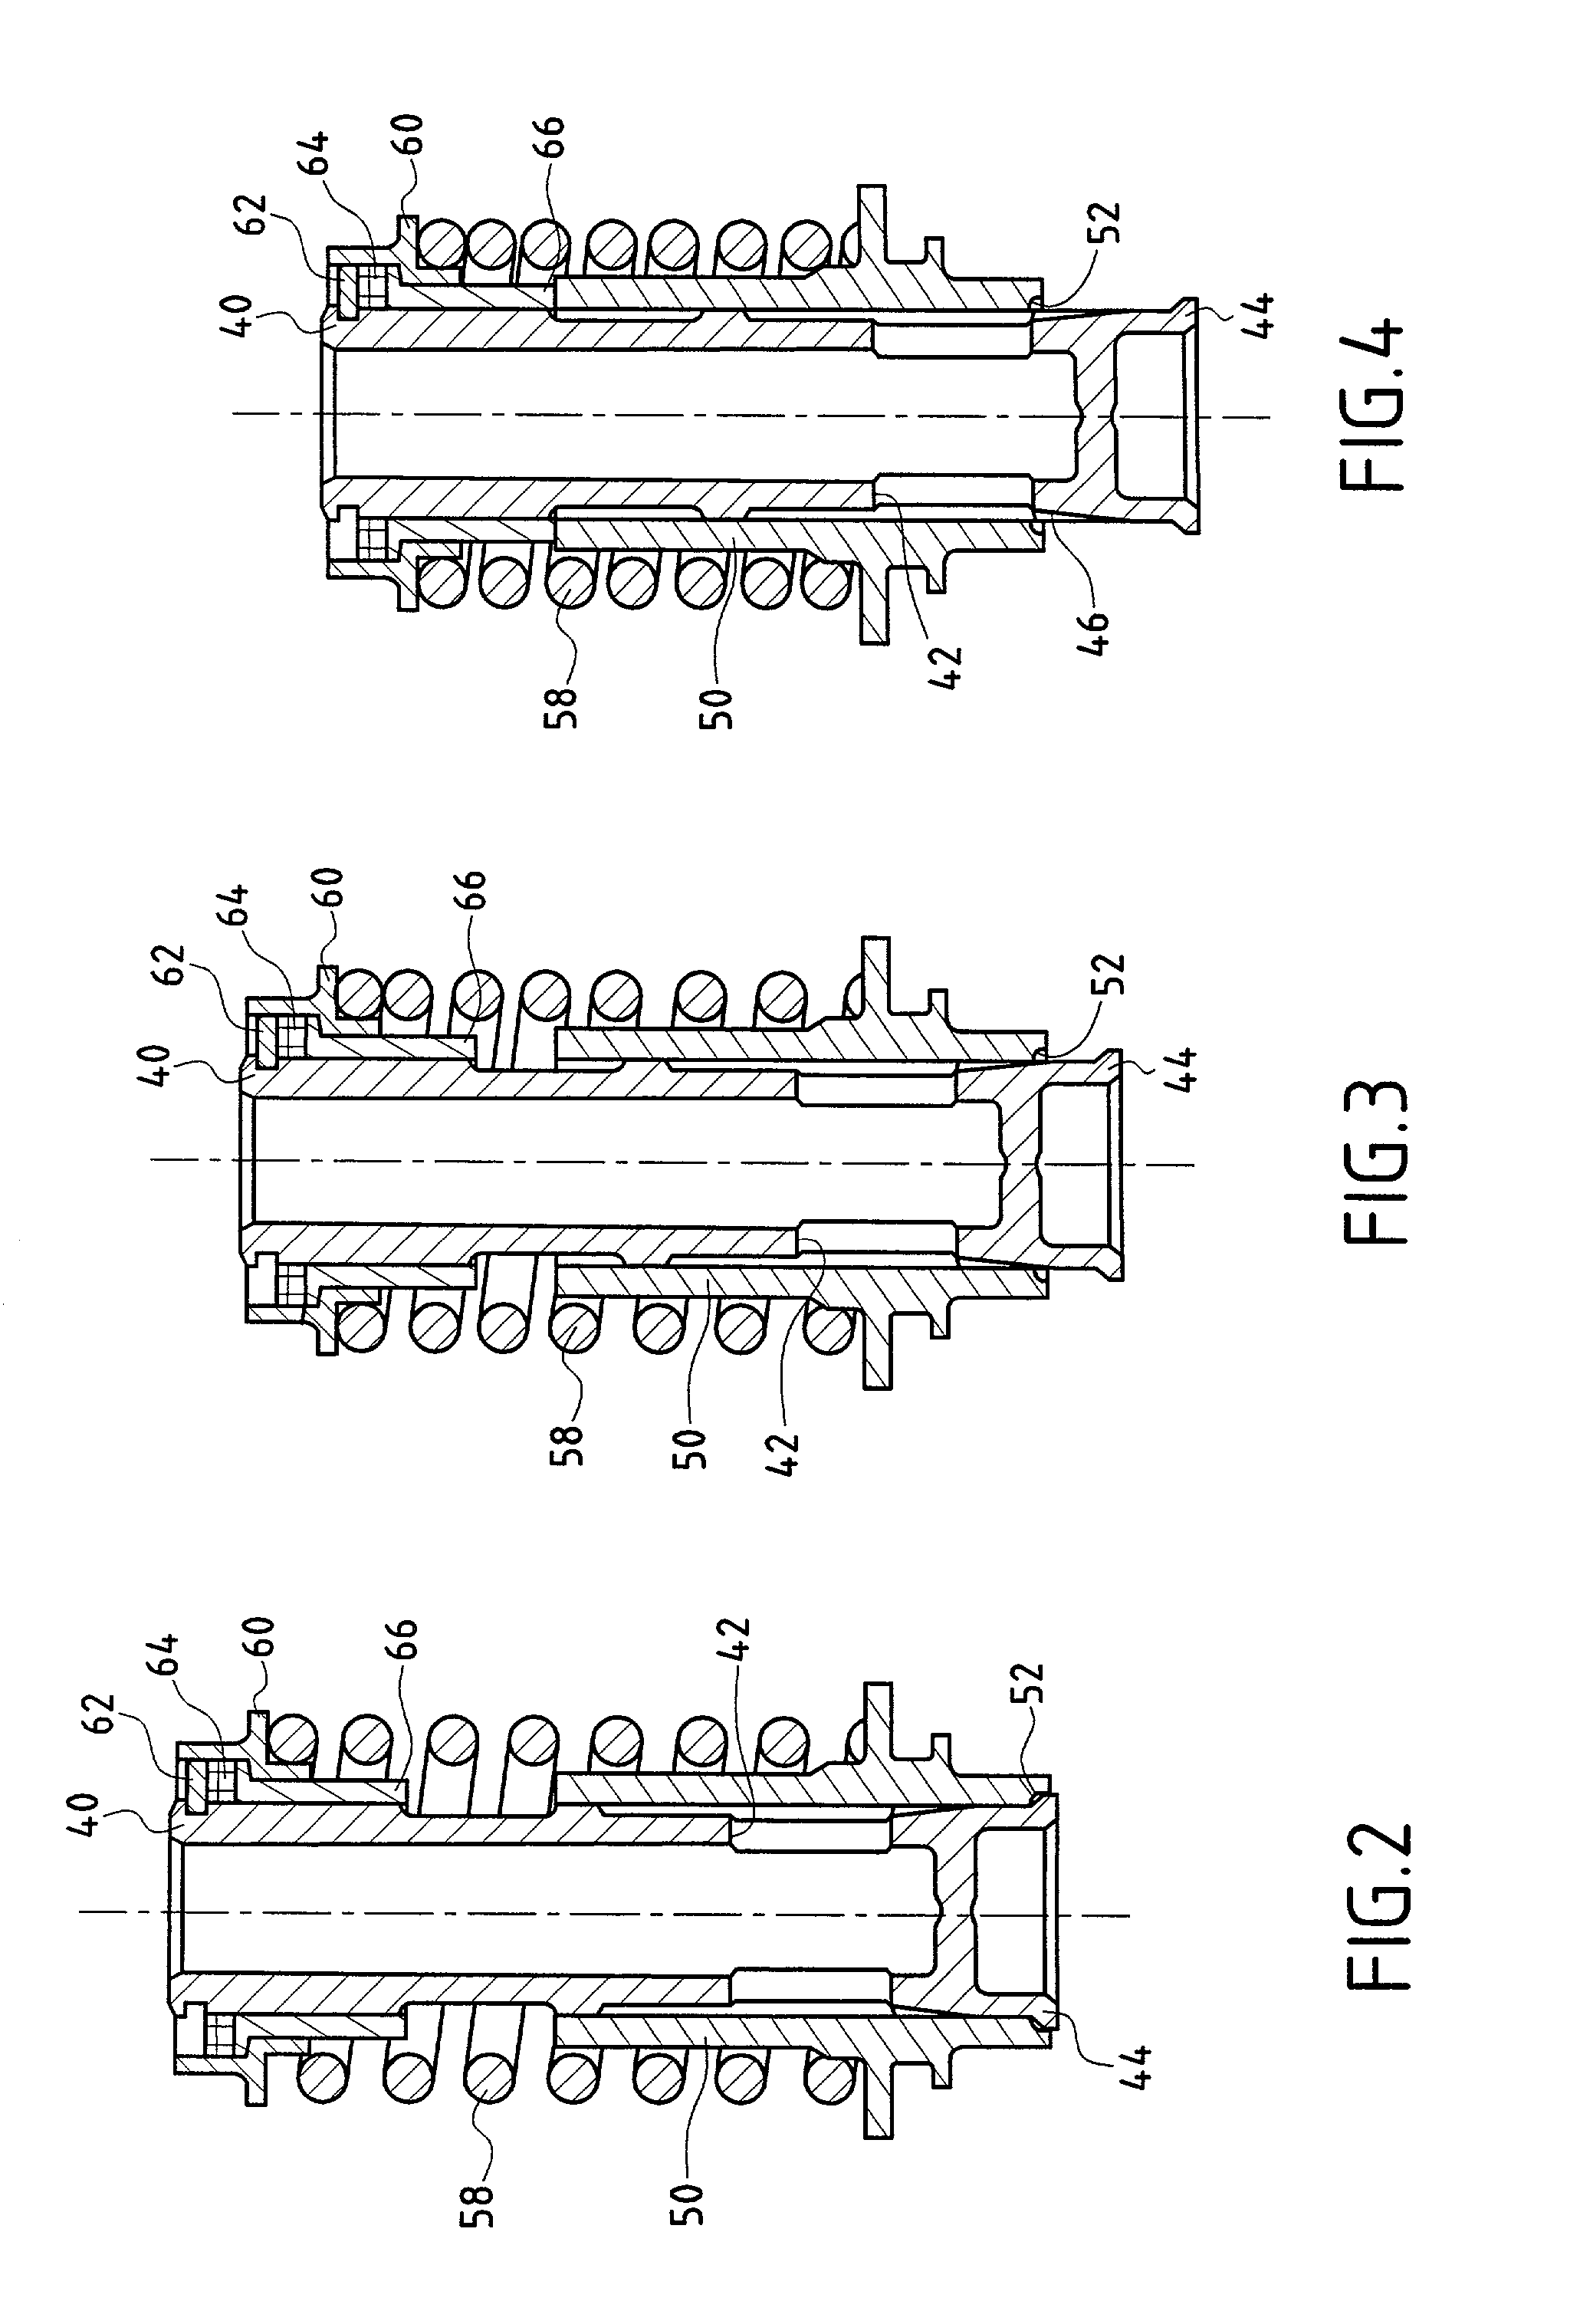 Fuel injector with an optimized metering device